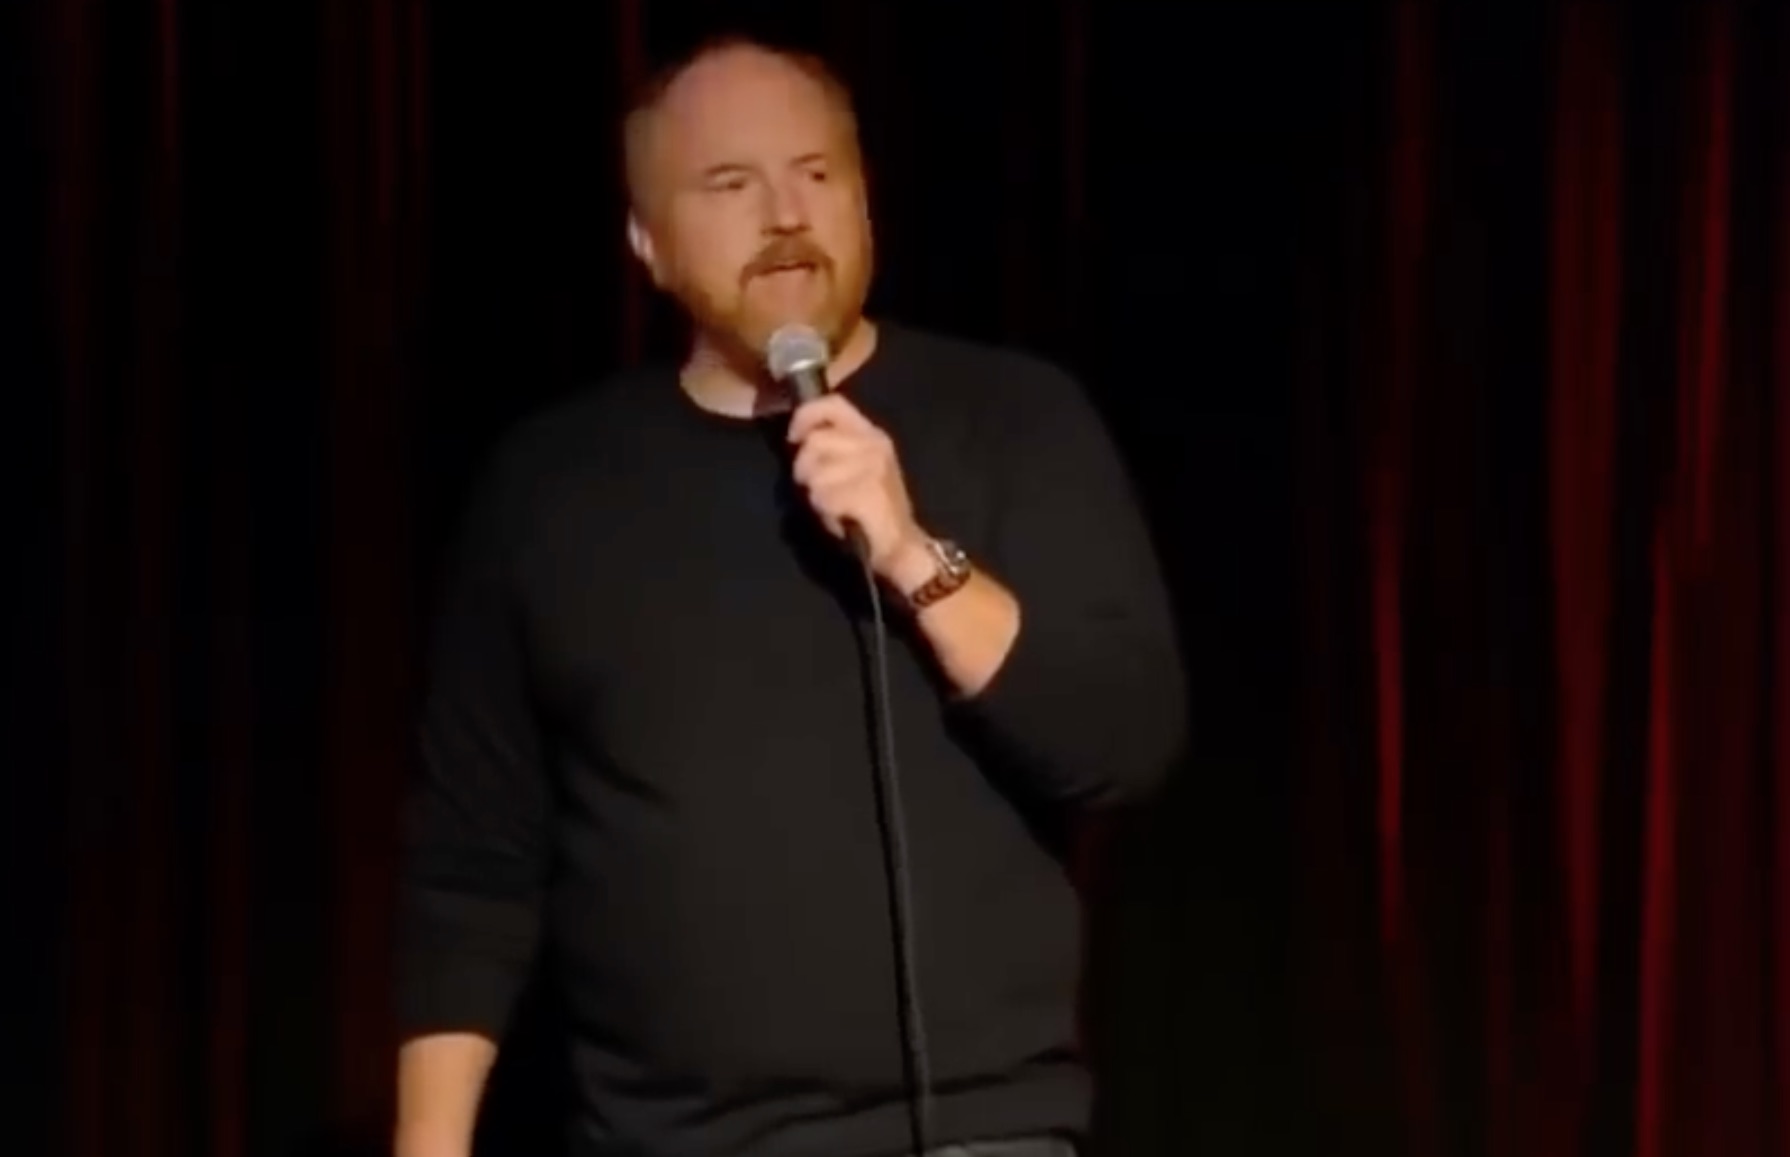 Louis C.K. Does Stand-Up For The First Time Since Sexual Misconduct Allegations Surfaced